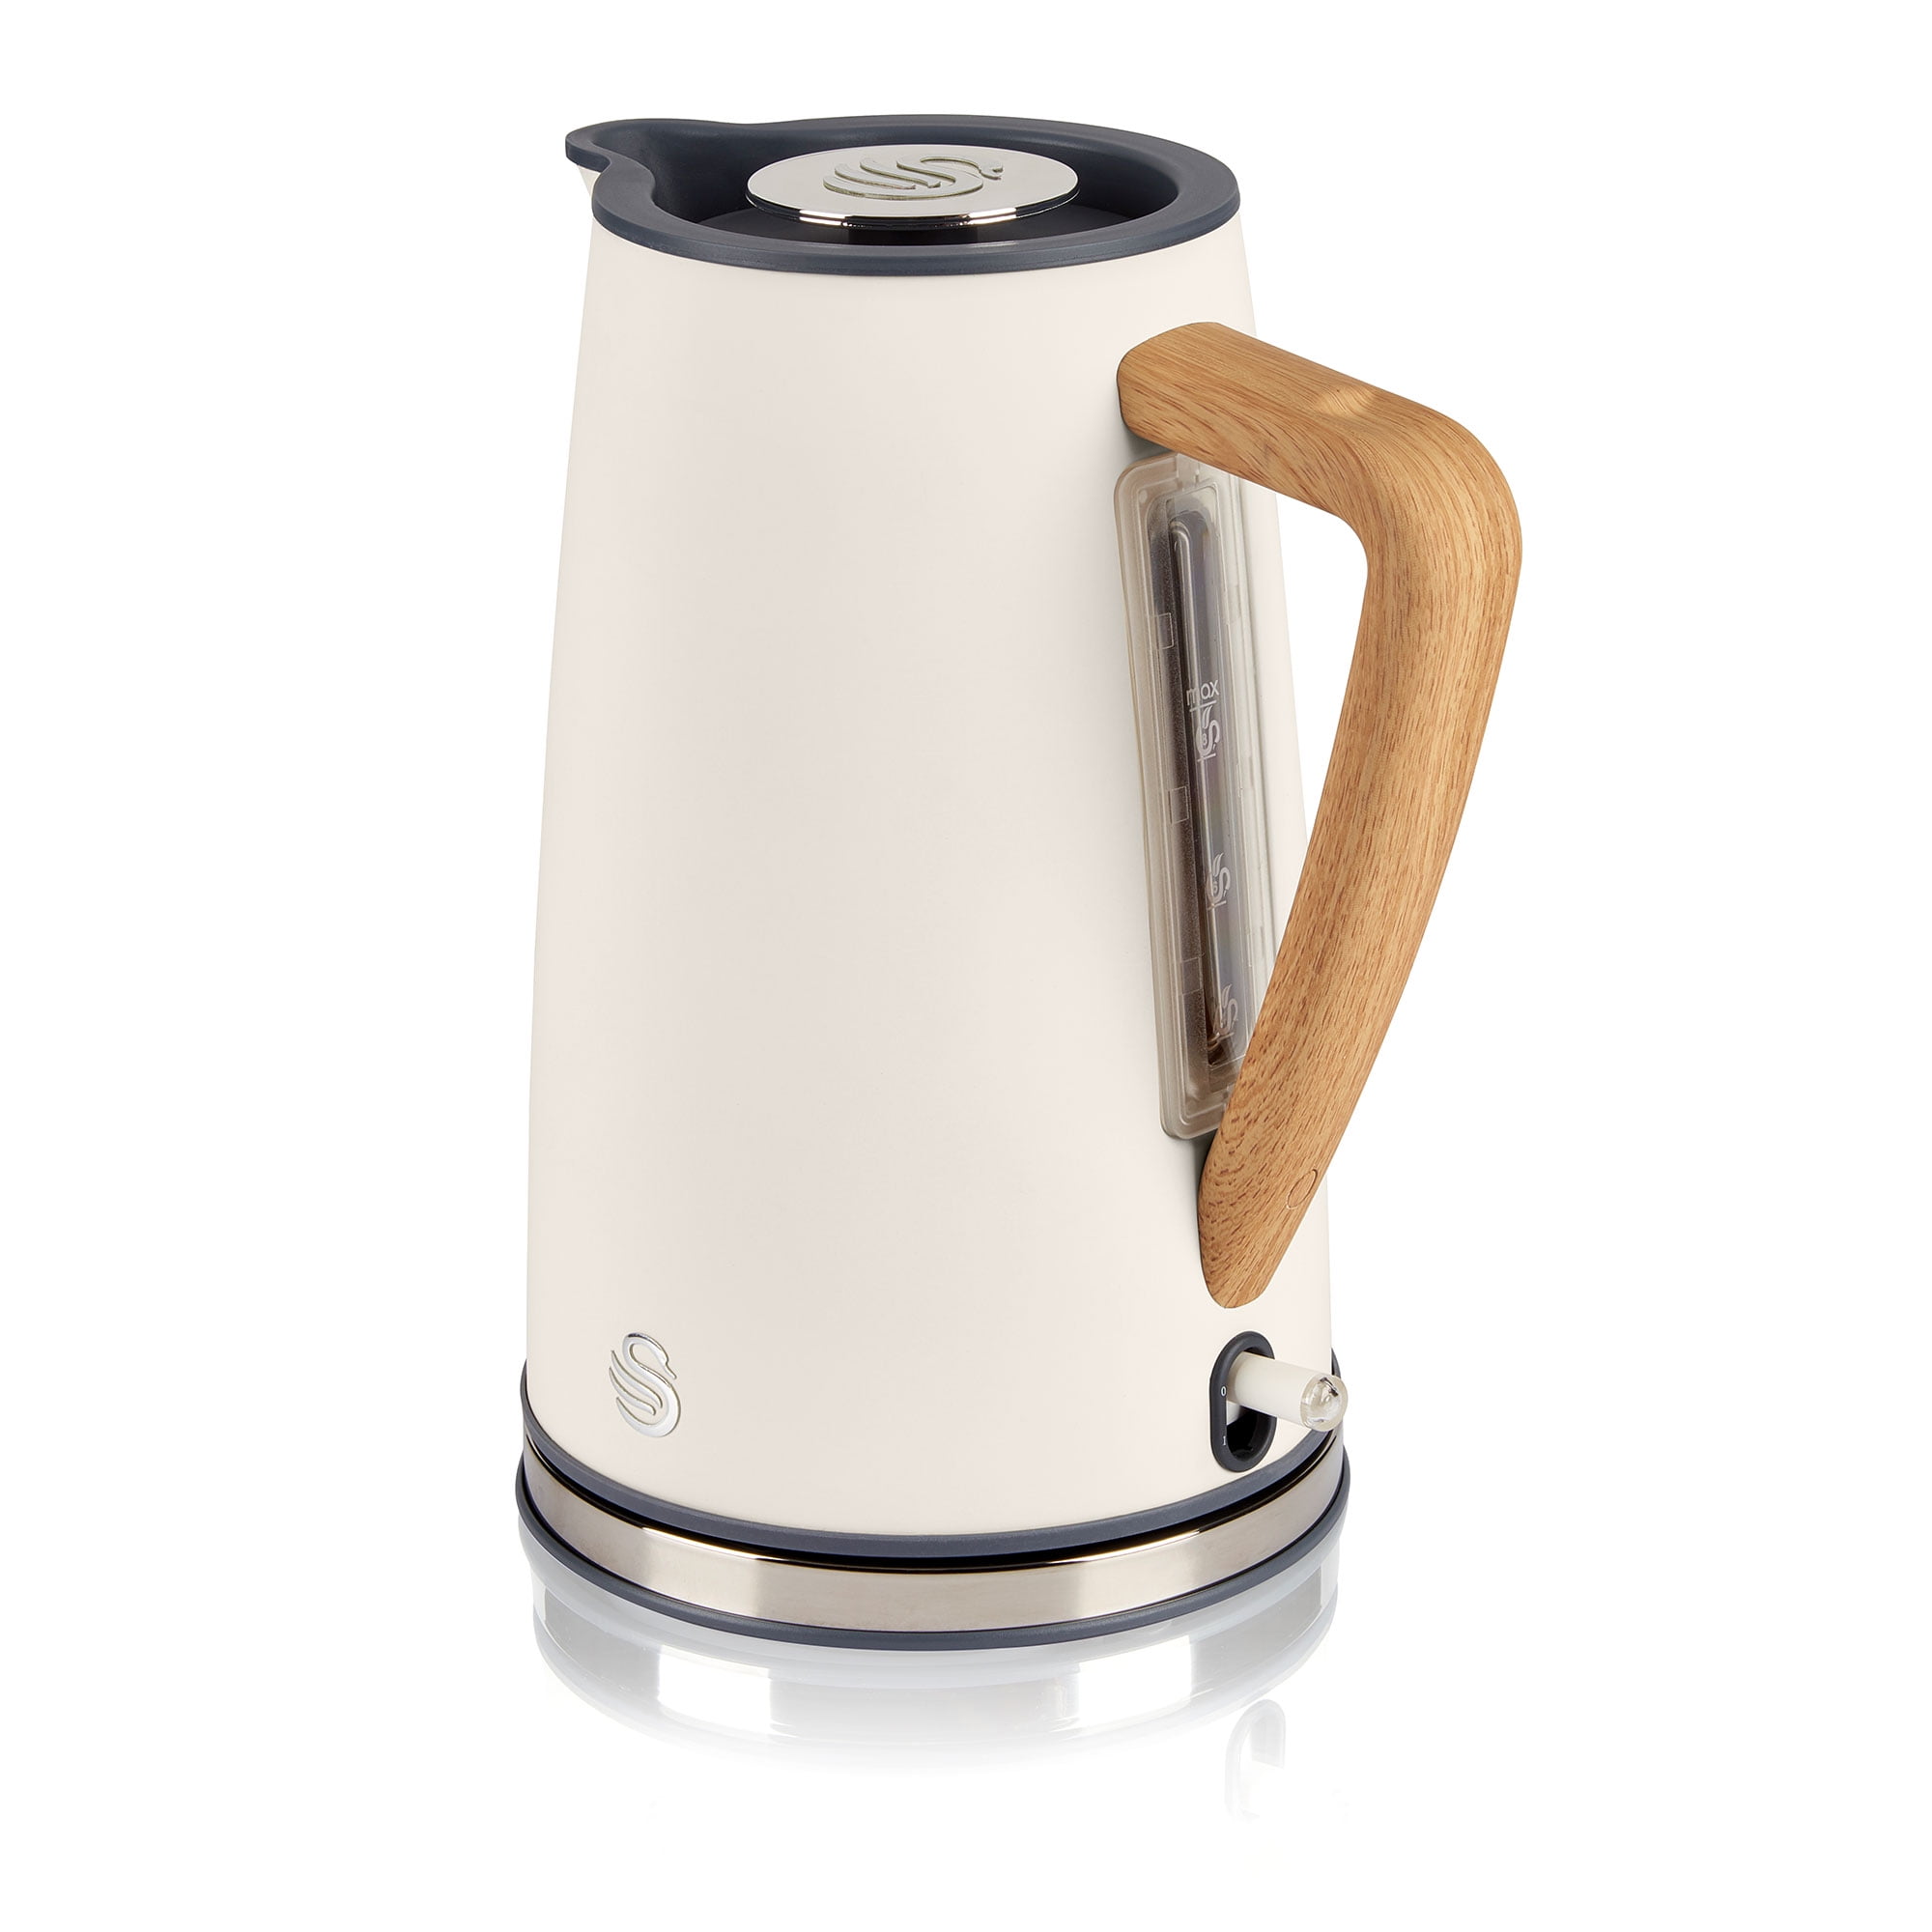 1.7 L Electric Kettle with Thin Chrome Trim Band - Painted Stainless Steel  - Figmint™